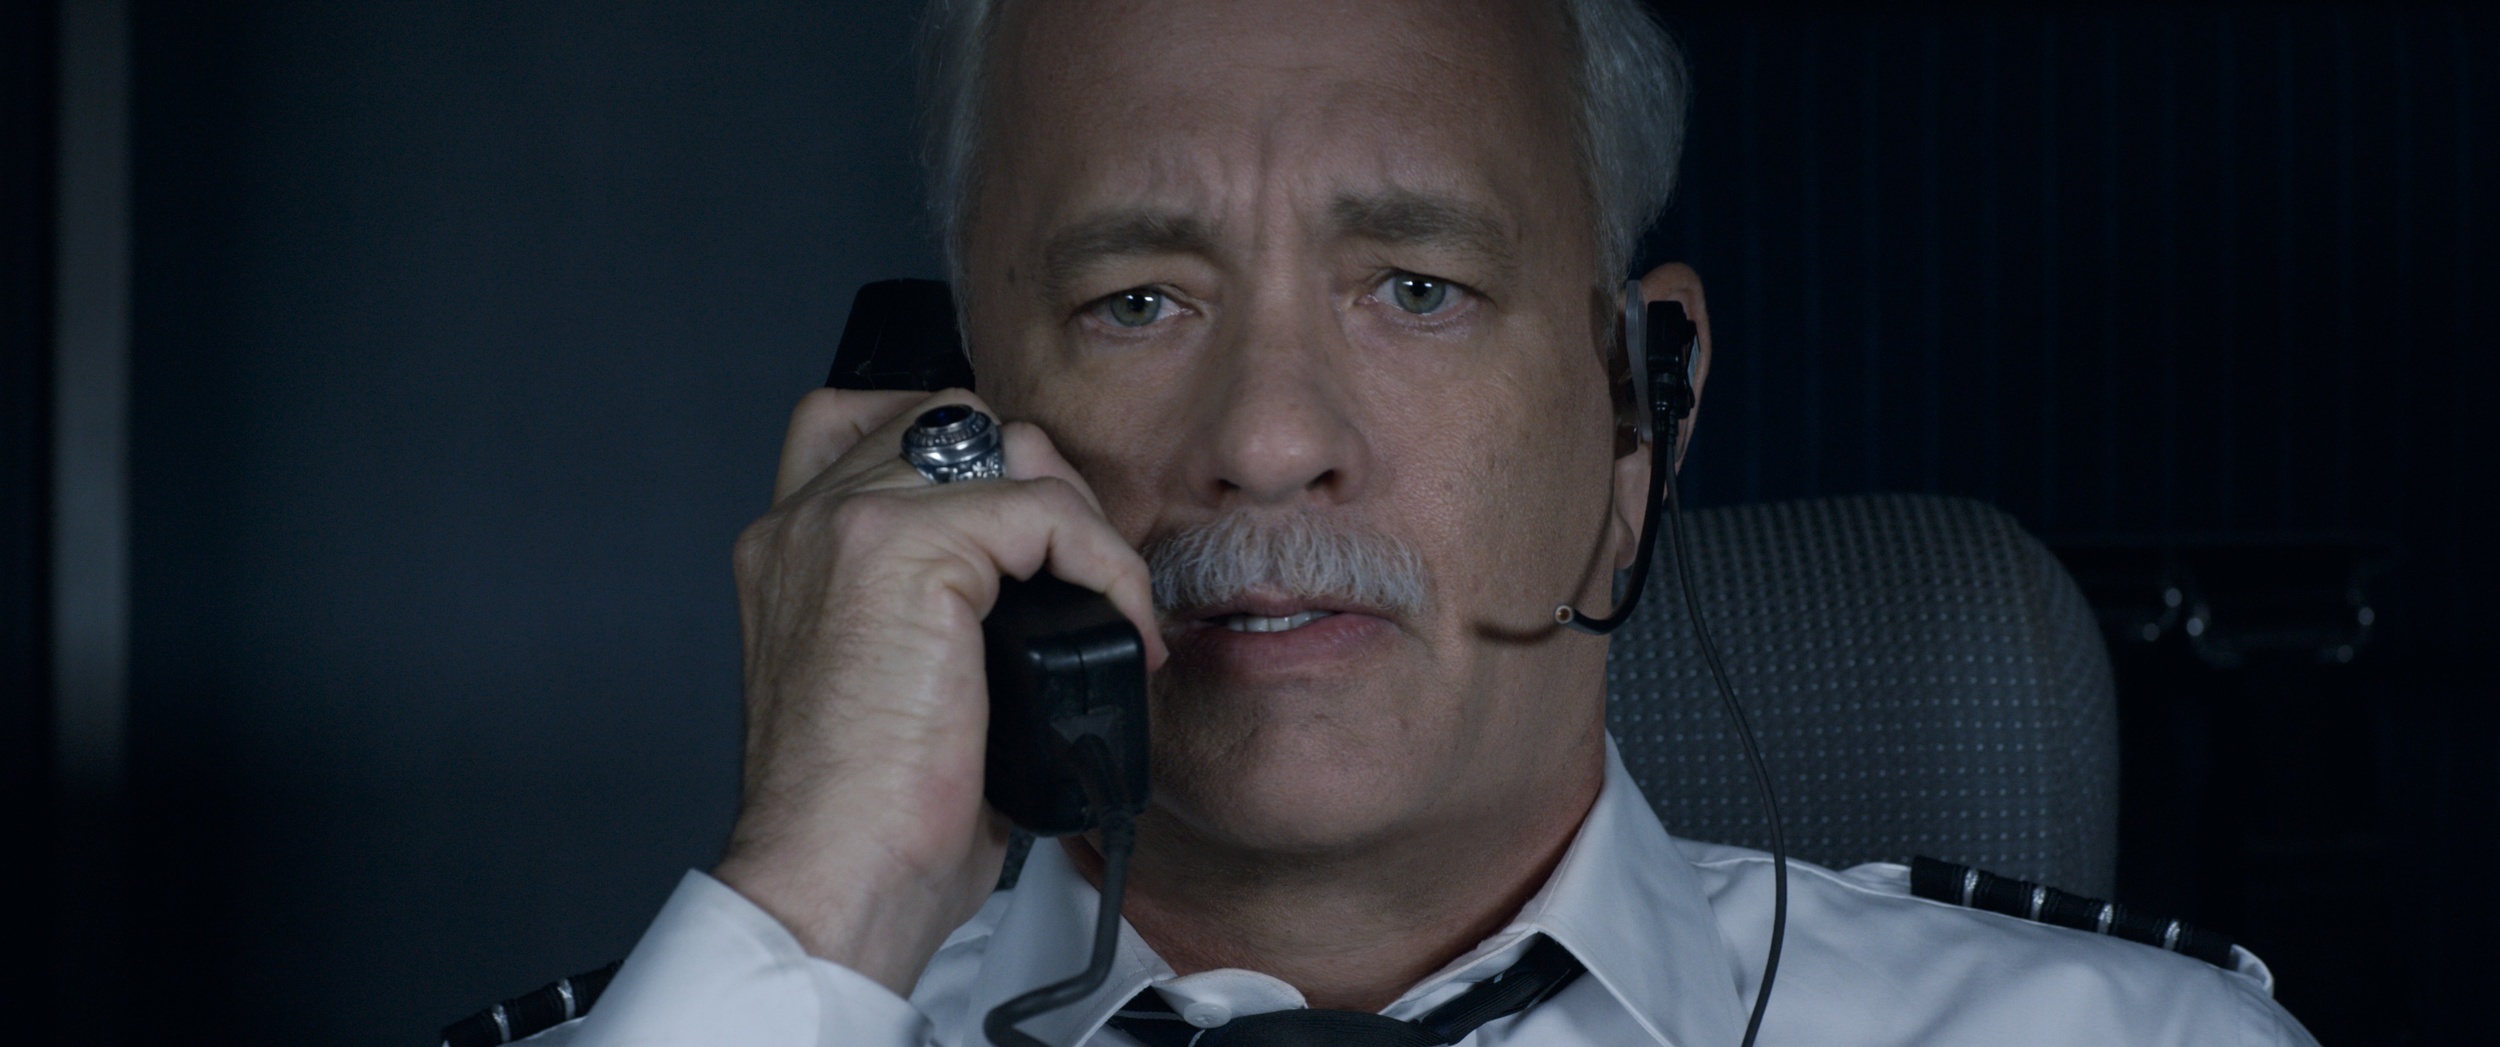 <p>You may have heard of Chesley “Sully” Sullenberger and the “Miracle on the Hudson.” The pilot famously landed a plane on the water under emergency circumstances with no casualties. This act of heroism got him a biopic, where he was played by noted nice guy Tom Hanks.</p><p><a href='https://www.msn.com/en-us/community/channel/vid-cj9pqbr0vn9in2b6ddcd8sfgpfq6x6utp44fssrv6mc2gtybw0us'>Follow us on MSN to see more of our exclusive entertainment content.</a></p>